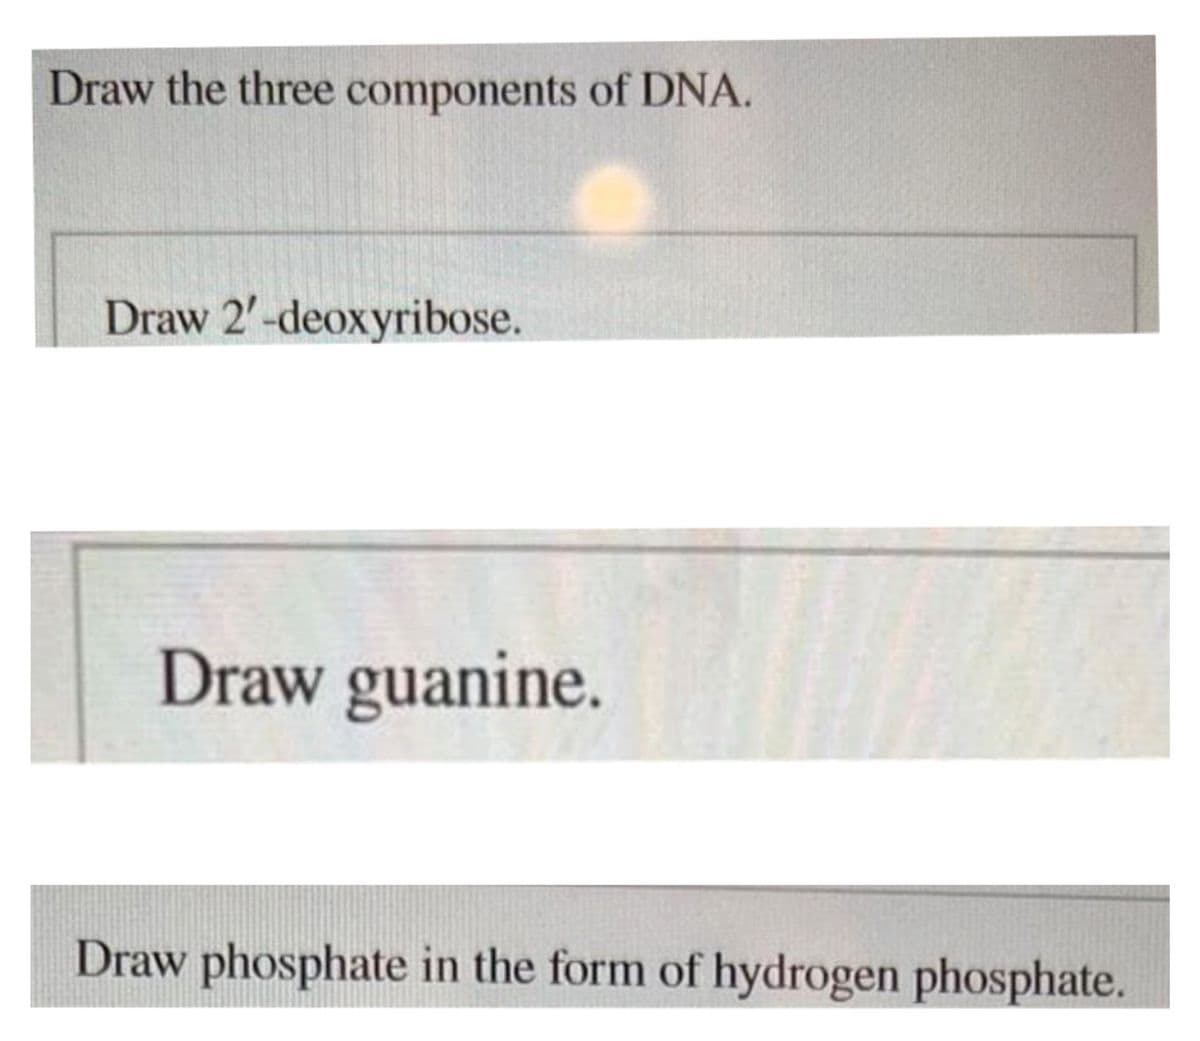 Draw the three components of DNA.
Draw 2'-deoxyribose.
Draw guanine.
Draw phosphate in the form of hydrogen phosphate.